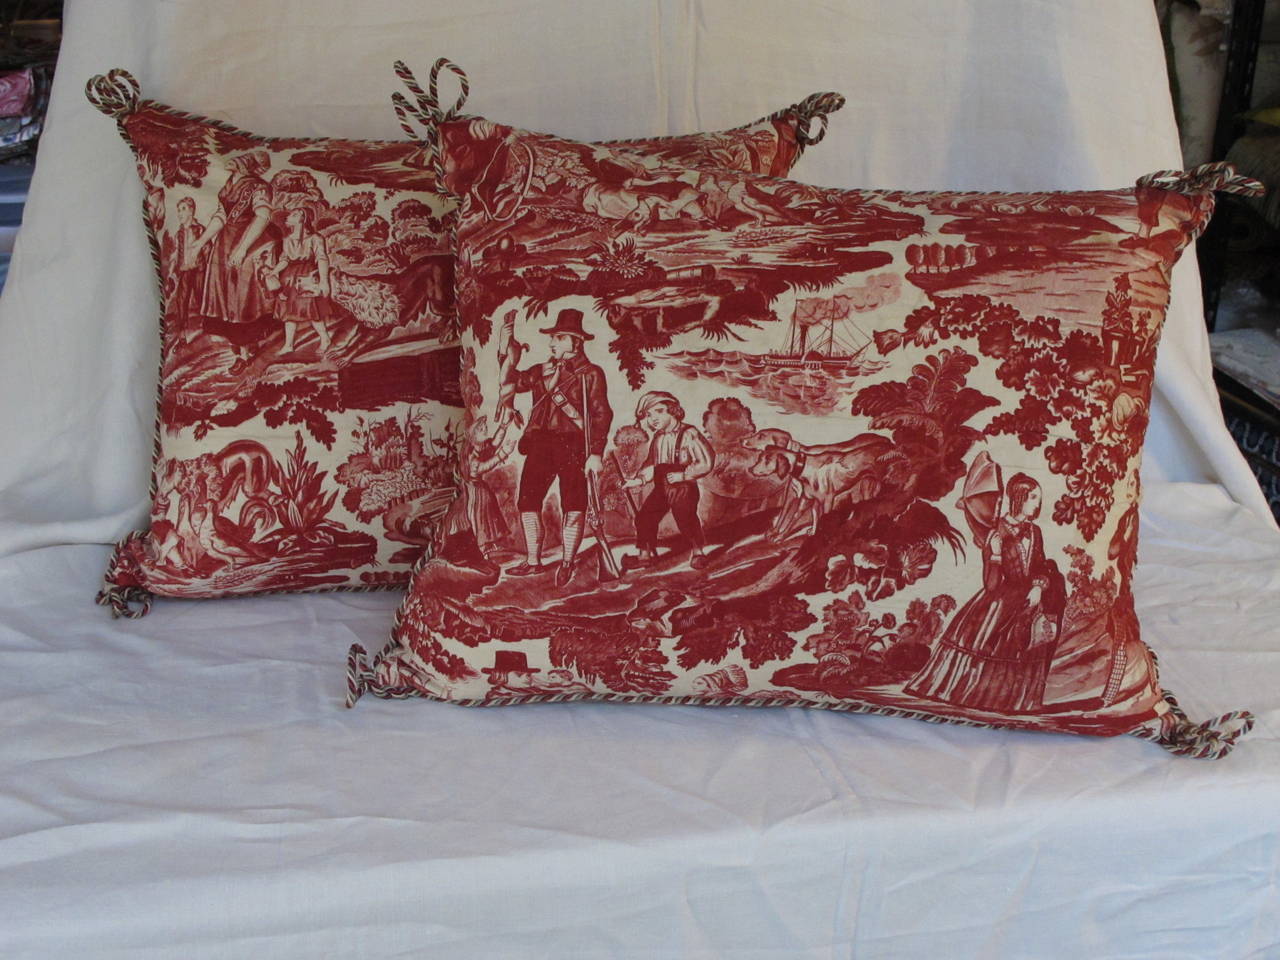 Newly made pillows from an early hand quilted toile de jouy backed with antique French ticking, includes a down insert.